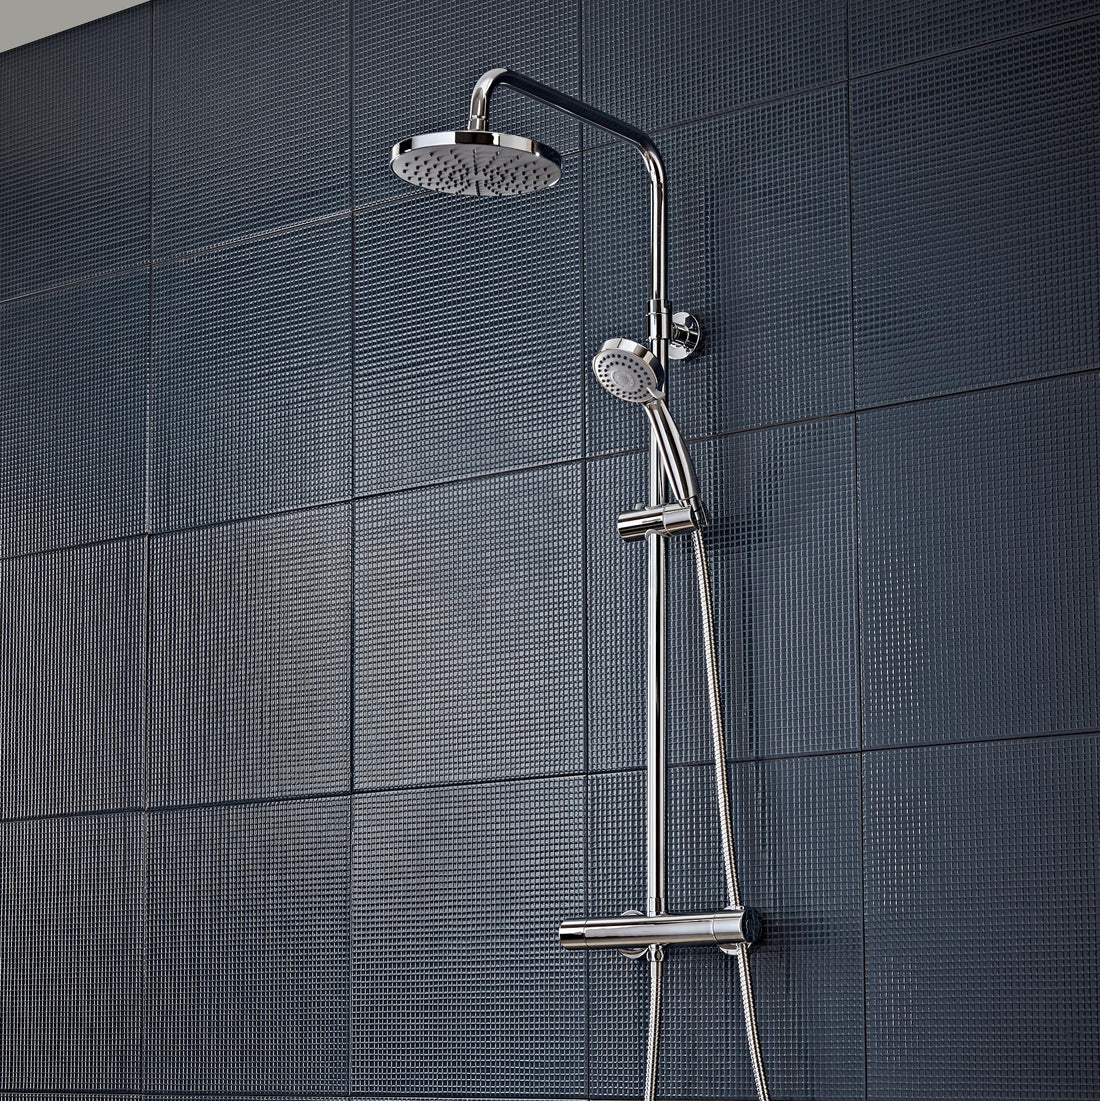 Tavistock Merit Round Exposed Bar Shower System with Fixed Head and Handset against dark blue tiled wall SMT1509